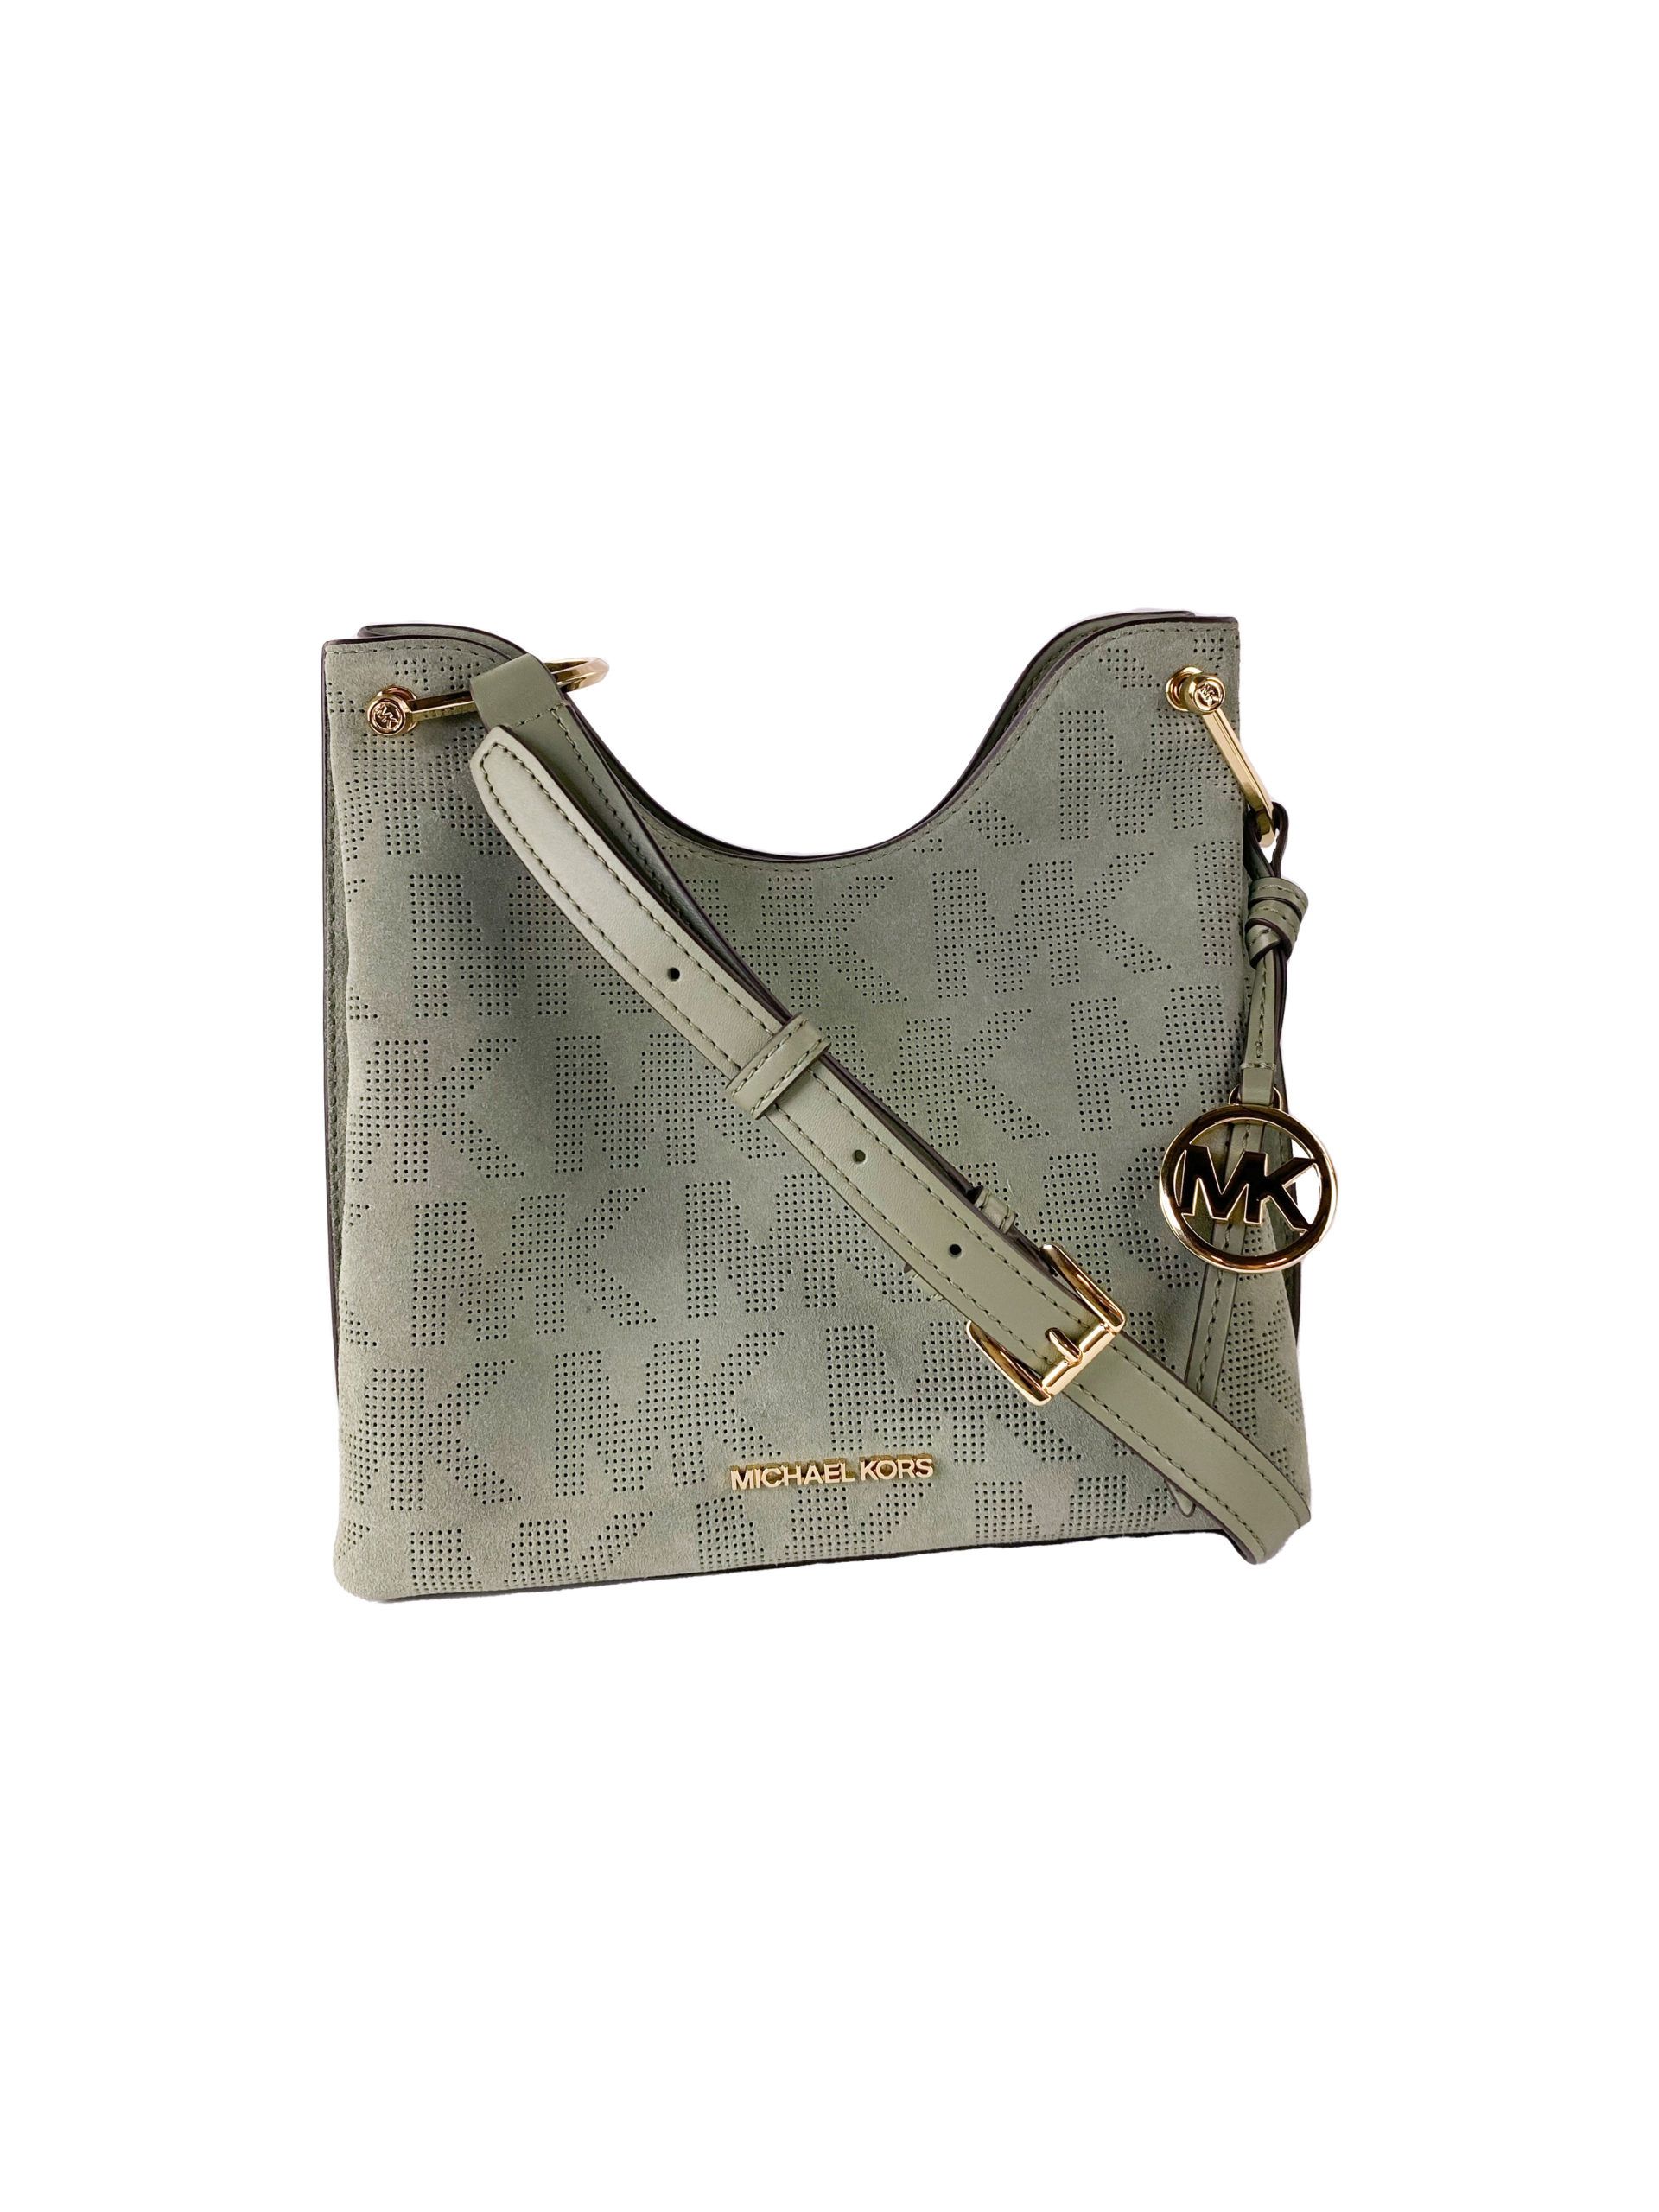 Green Michael Kors Joan Large Perforated Suede Leather Slouchy Messenger Handbag (Army Green)